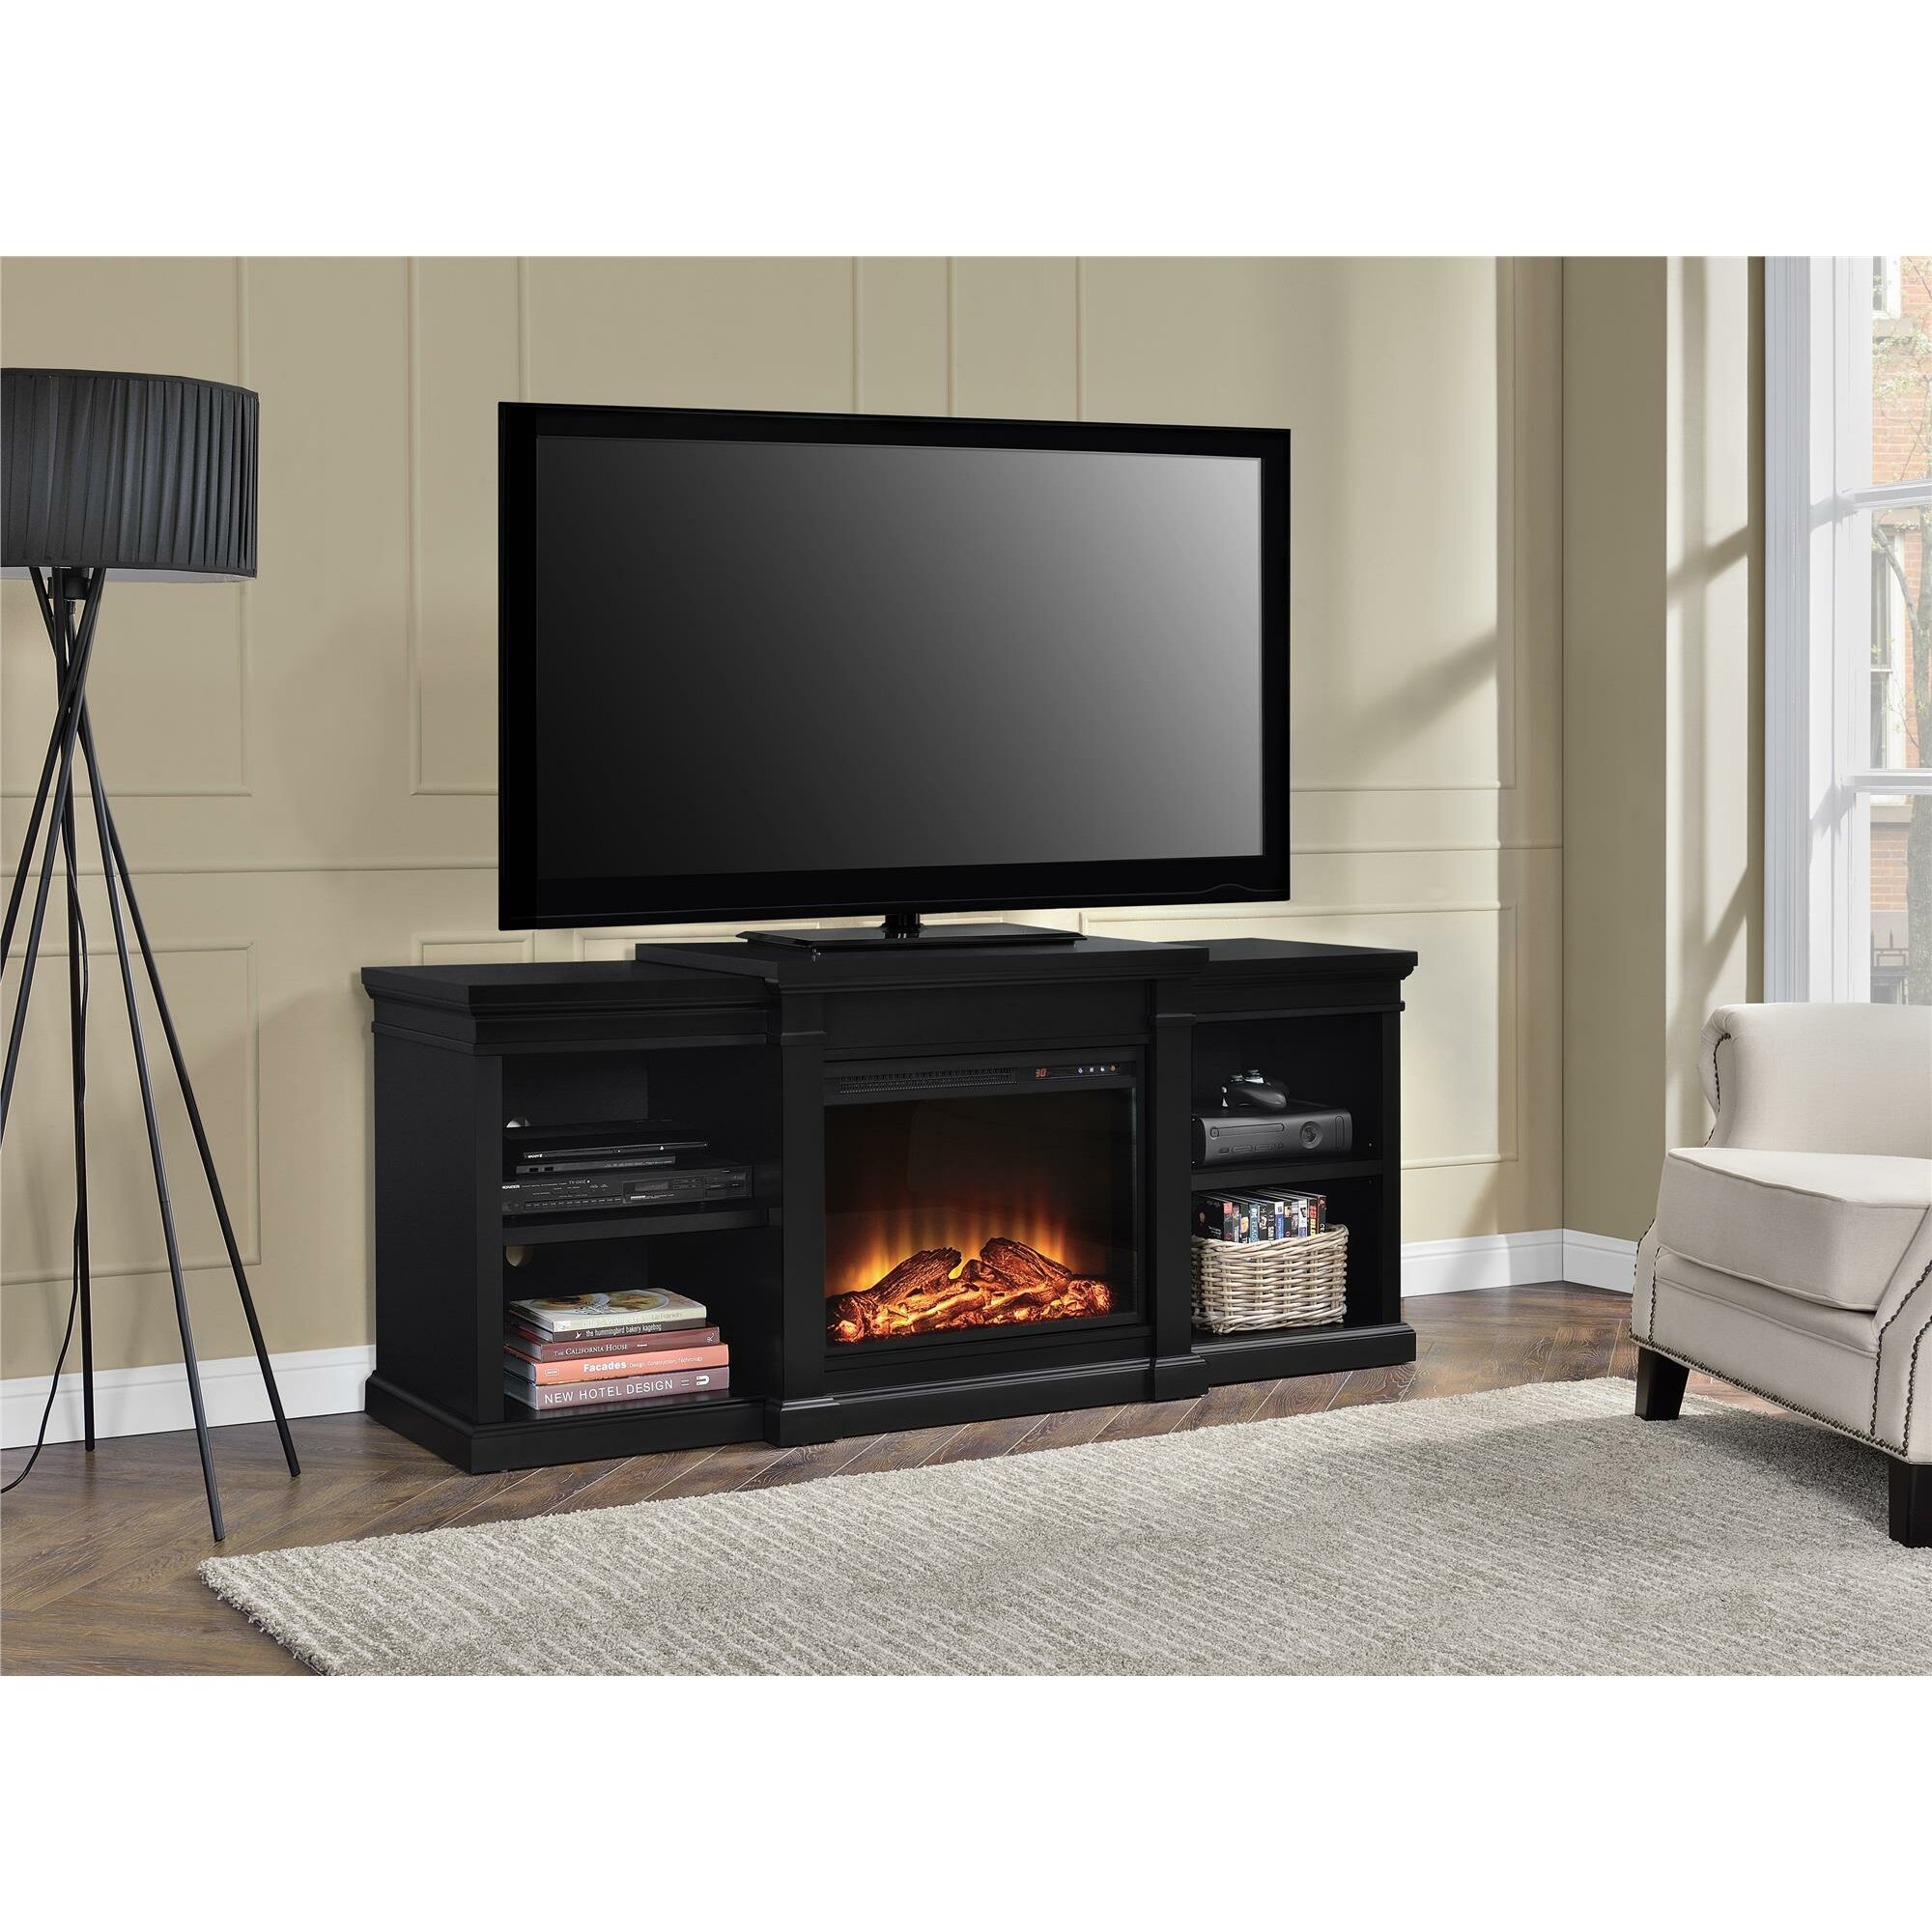 Darby Home Co Bryn TV Stand with Electric Fireplace ...